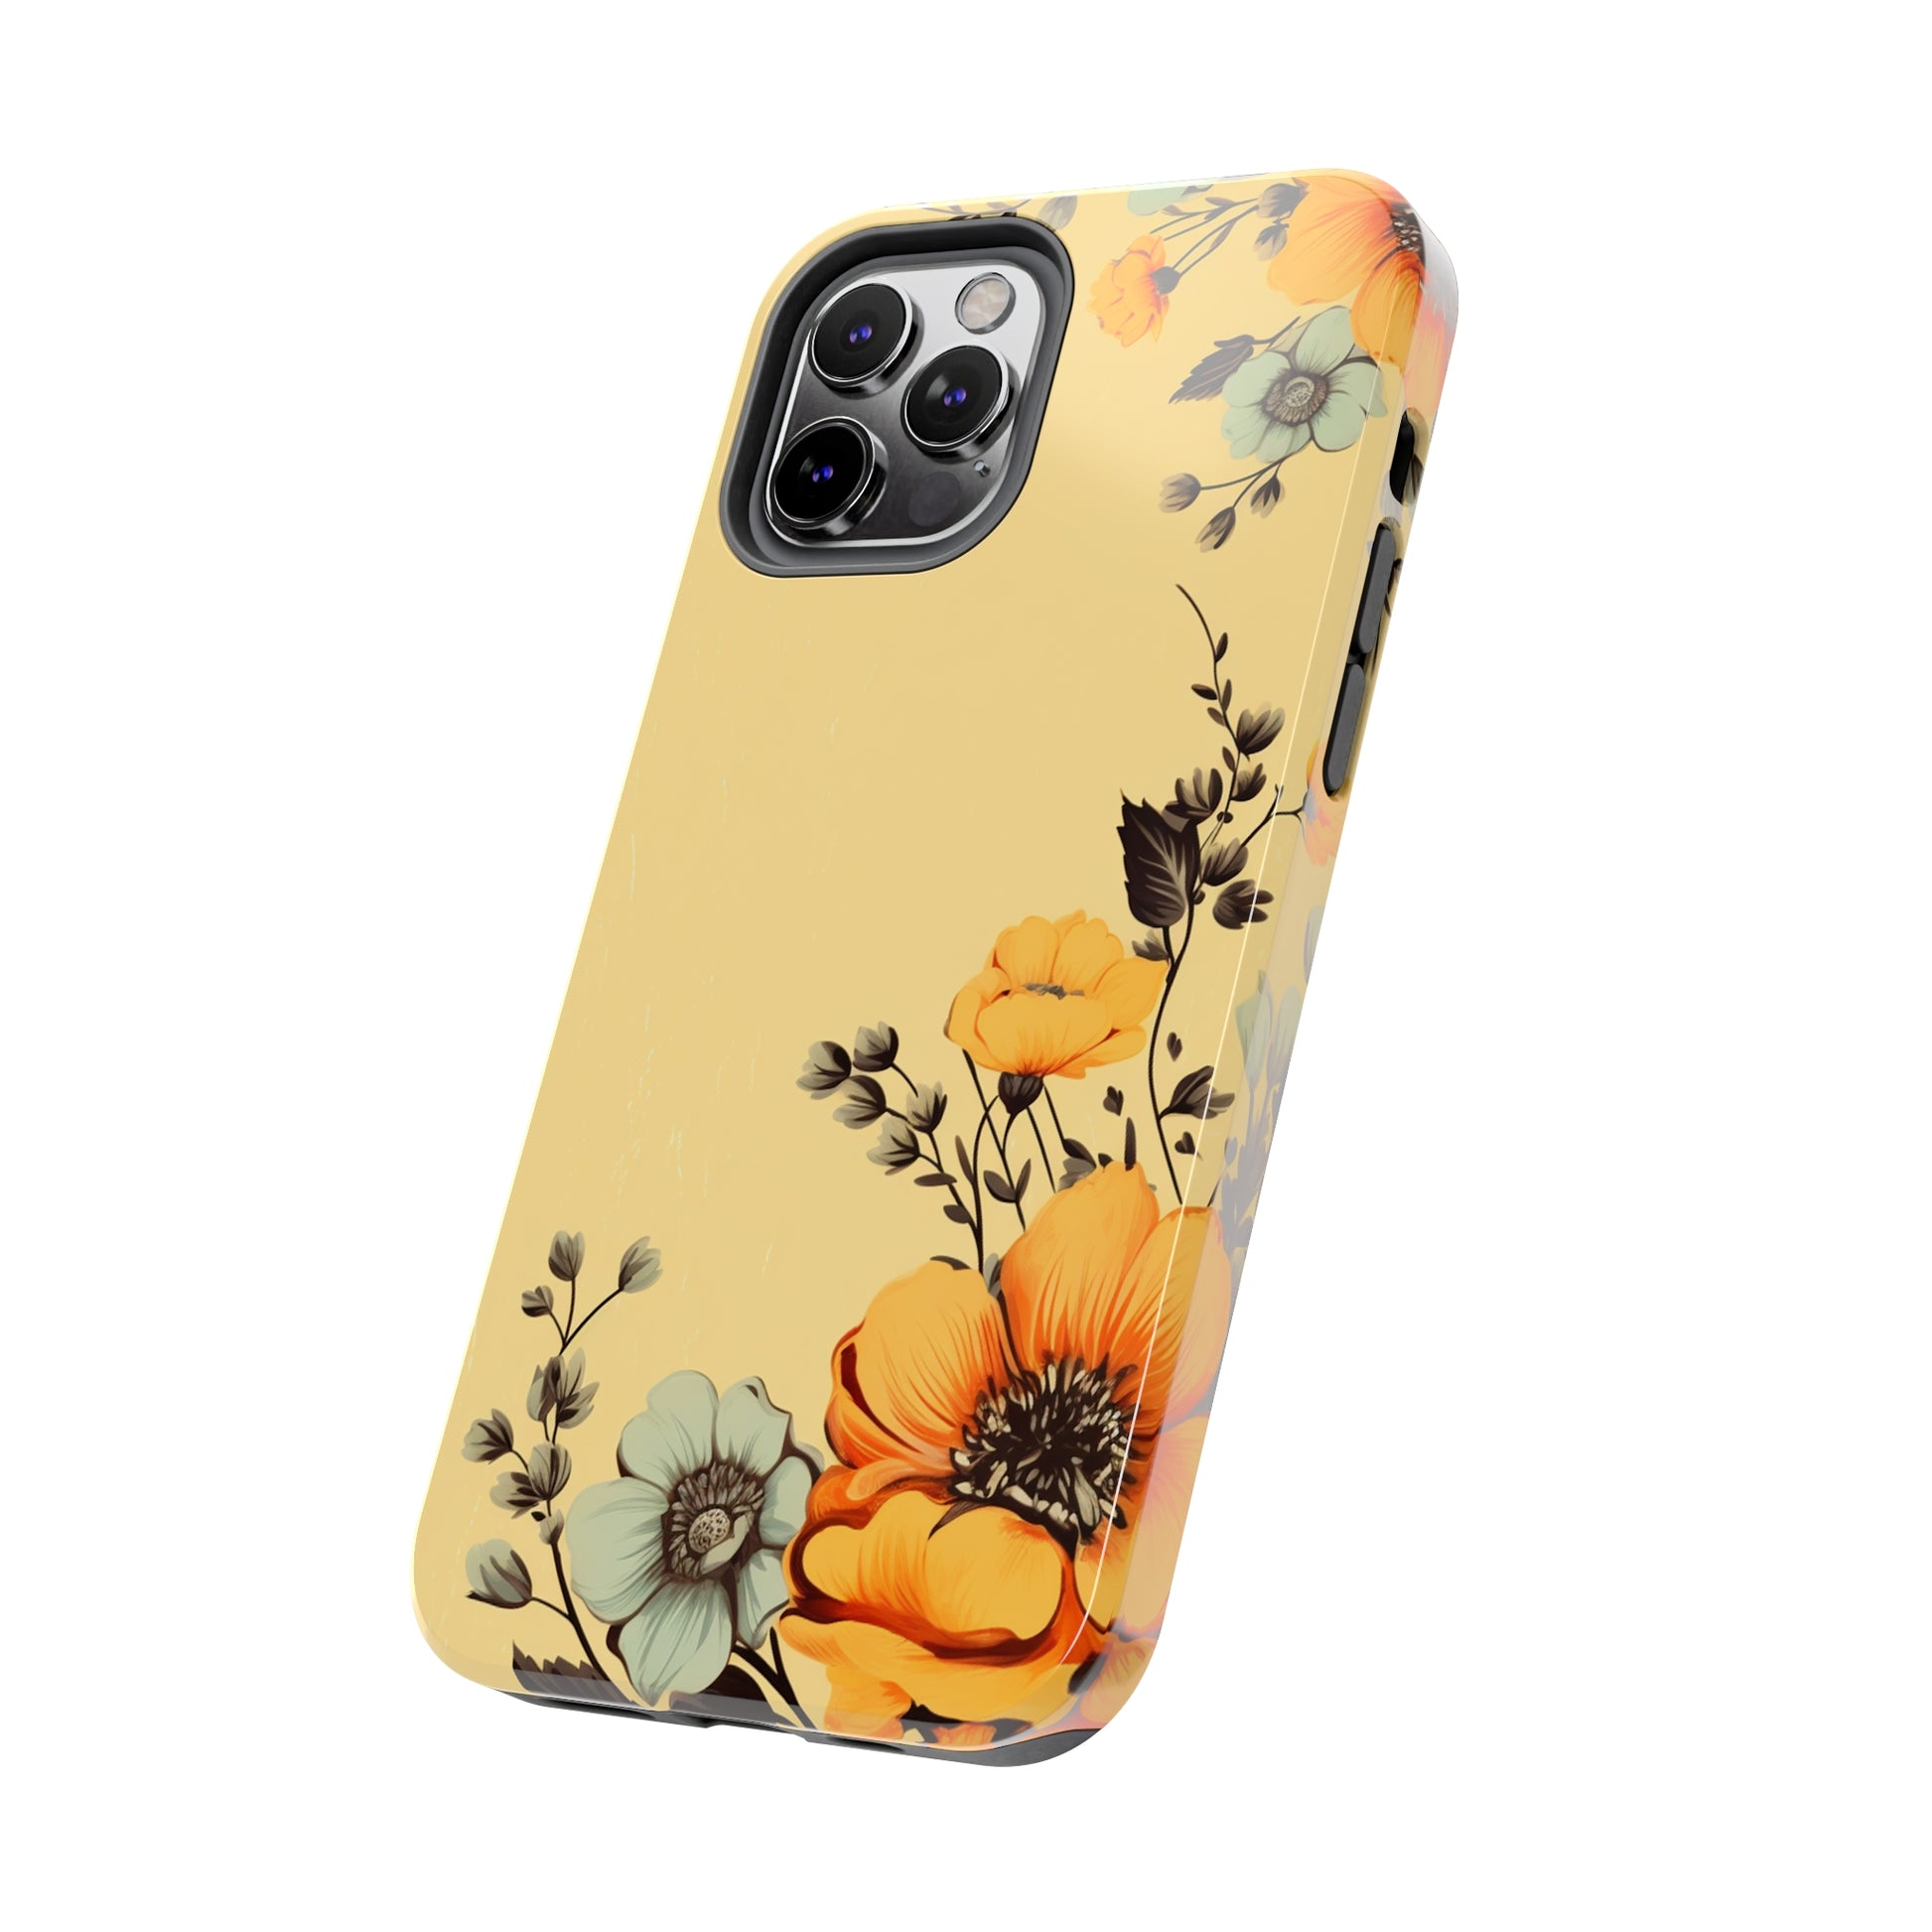 Timeless floral elegance for iPhone 12 and 13